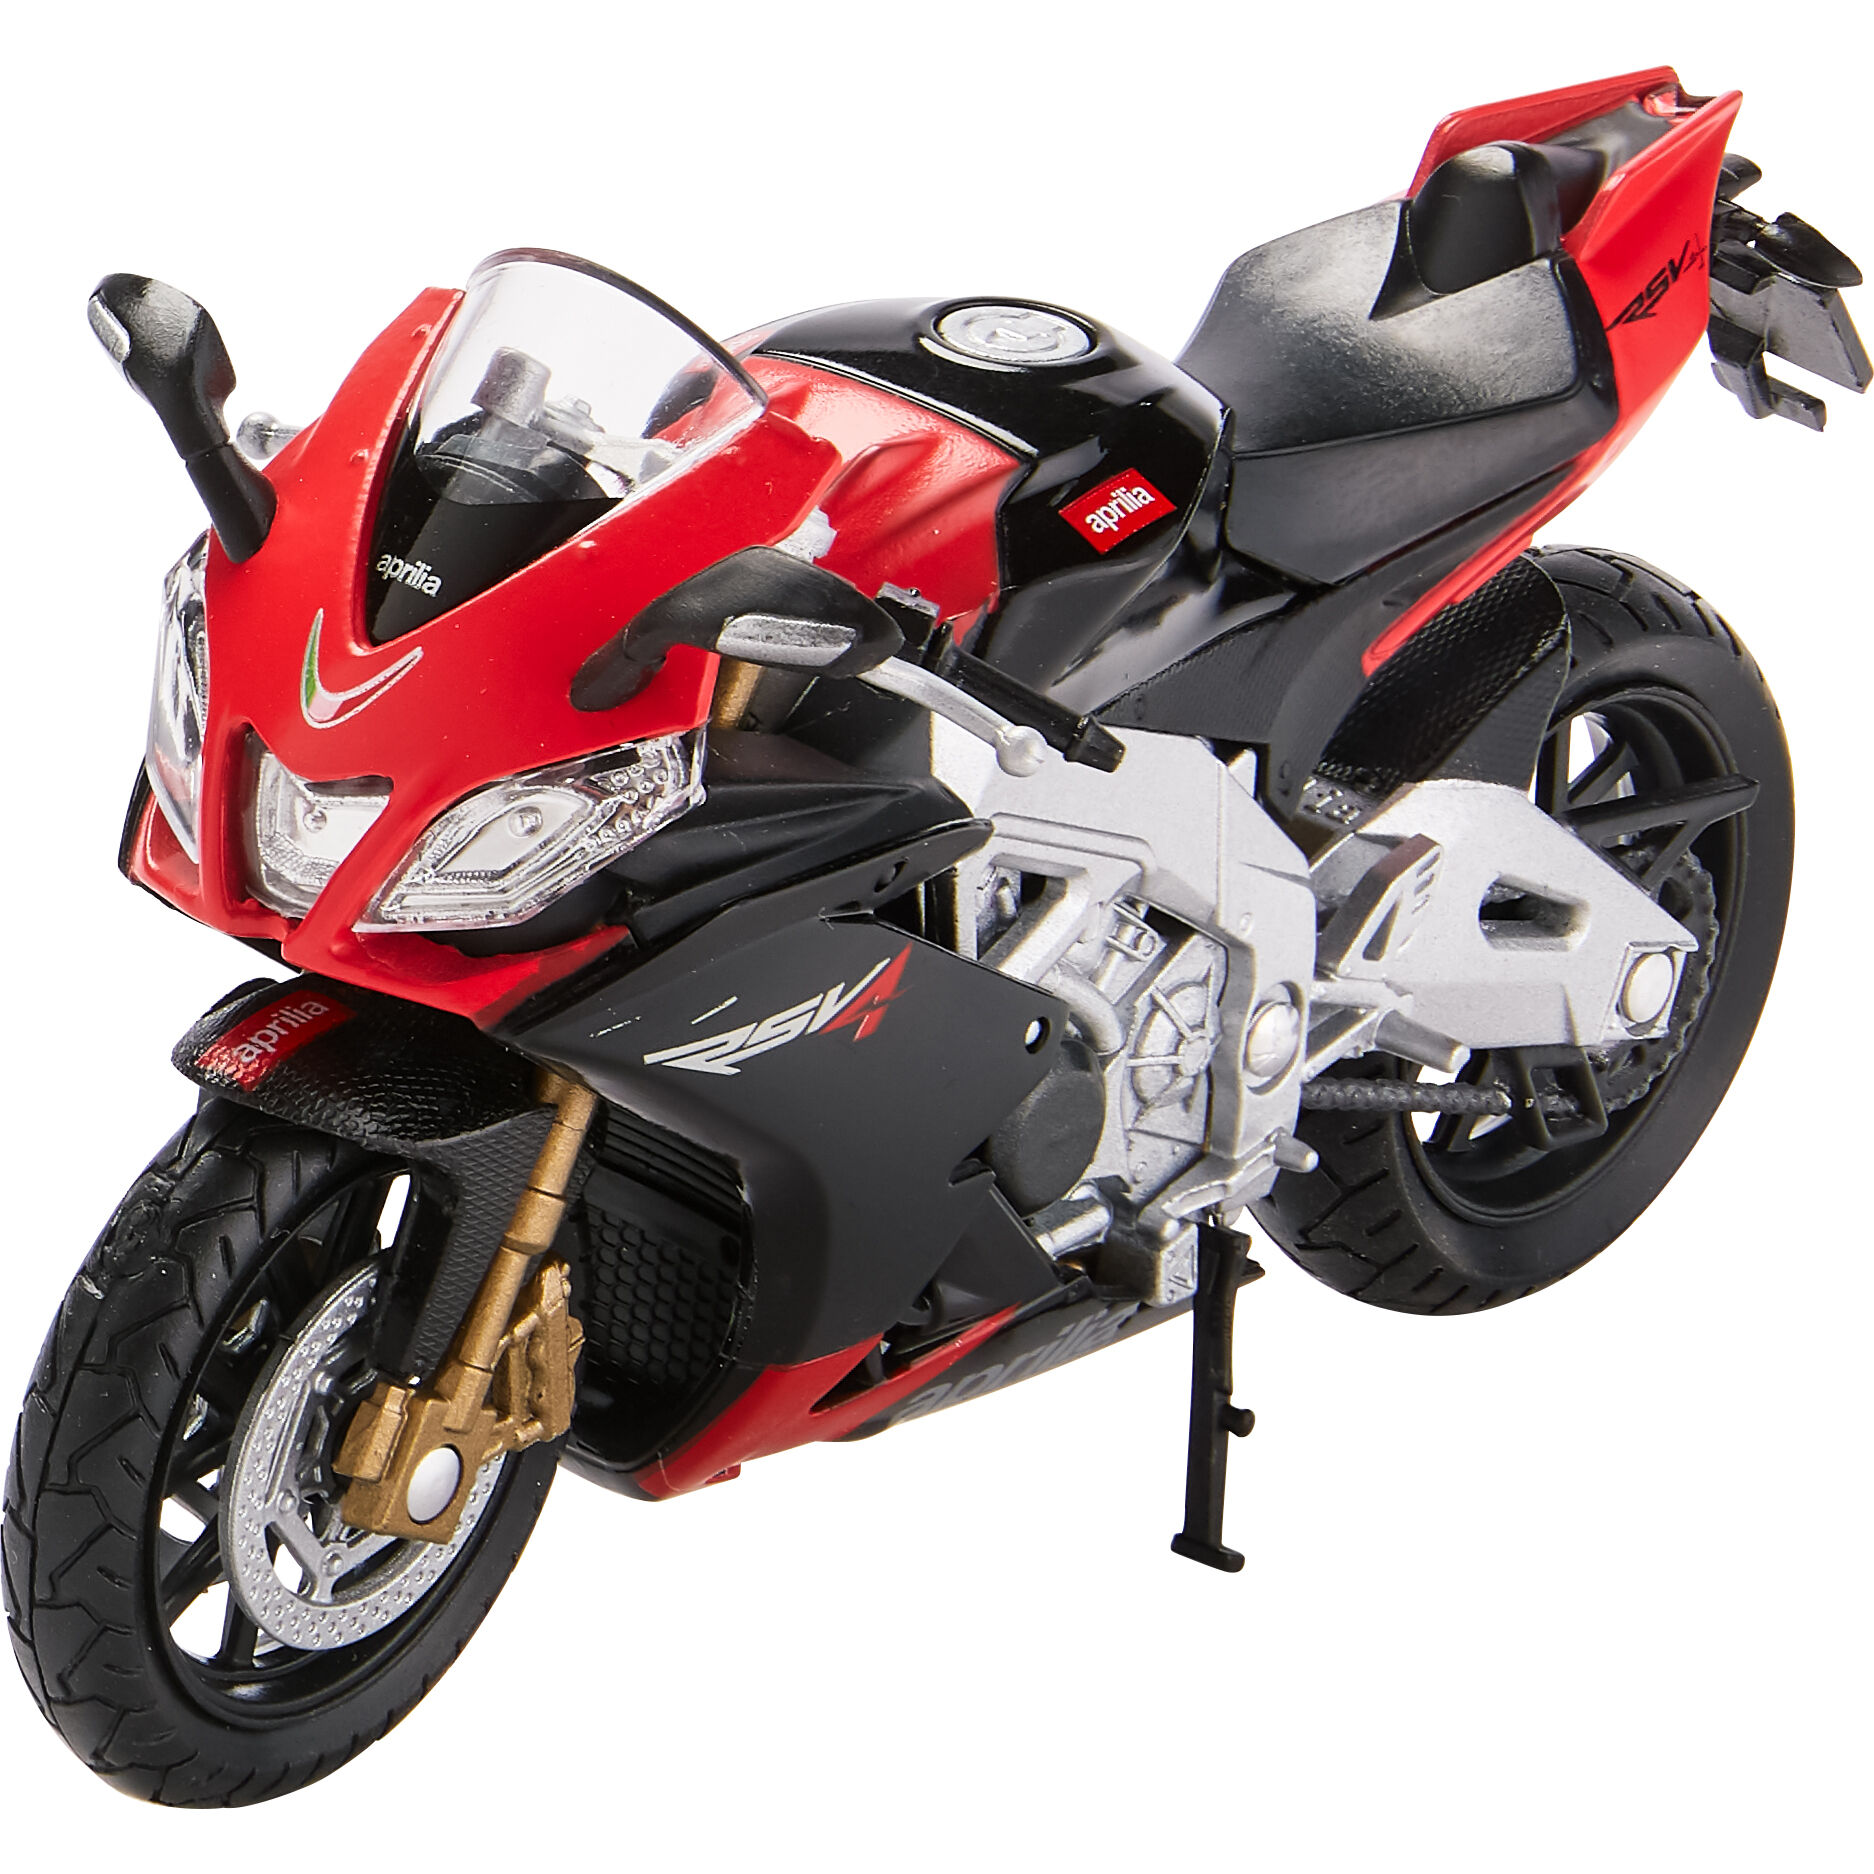 1:18 Welly Aprilia RSV 4 Factory Motorcycle Bike Model New Red 